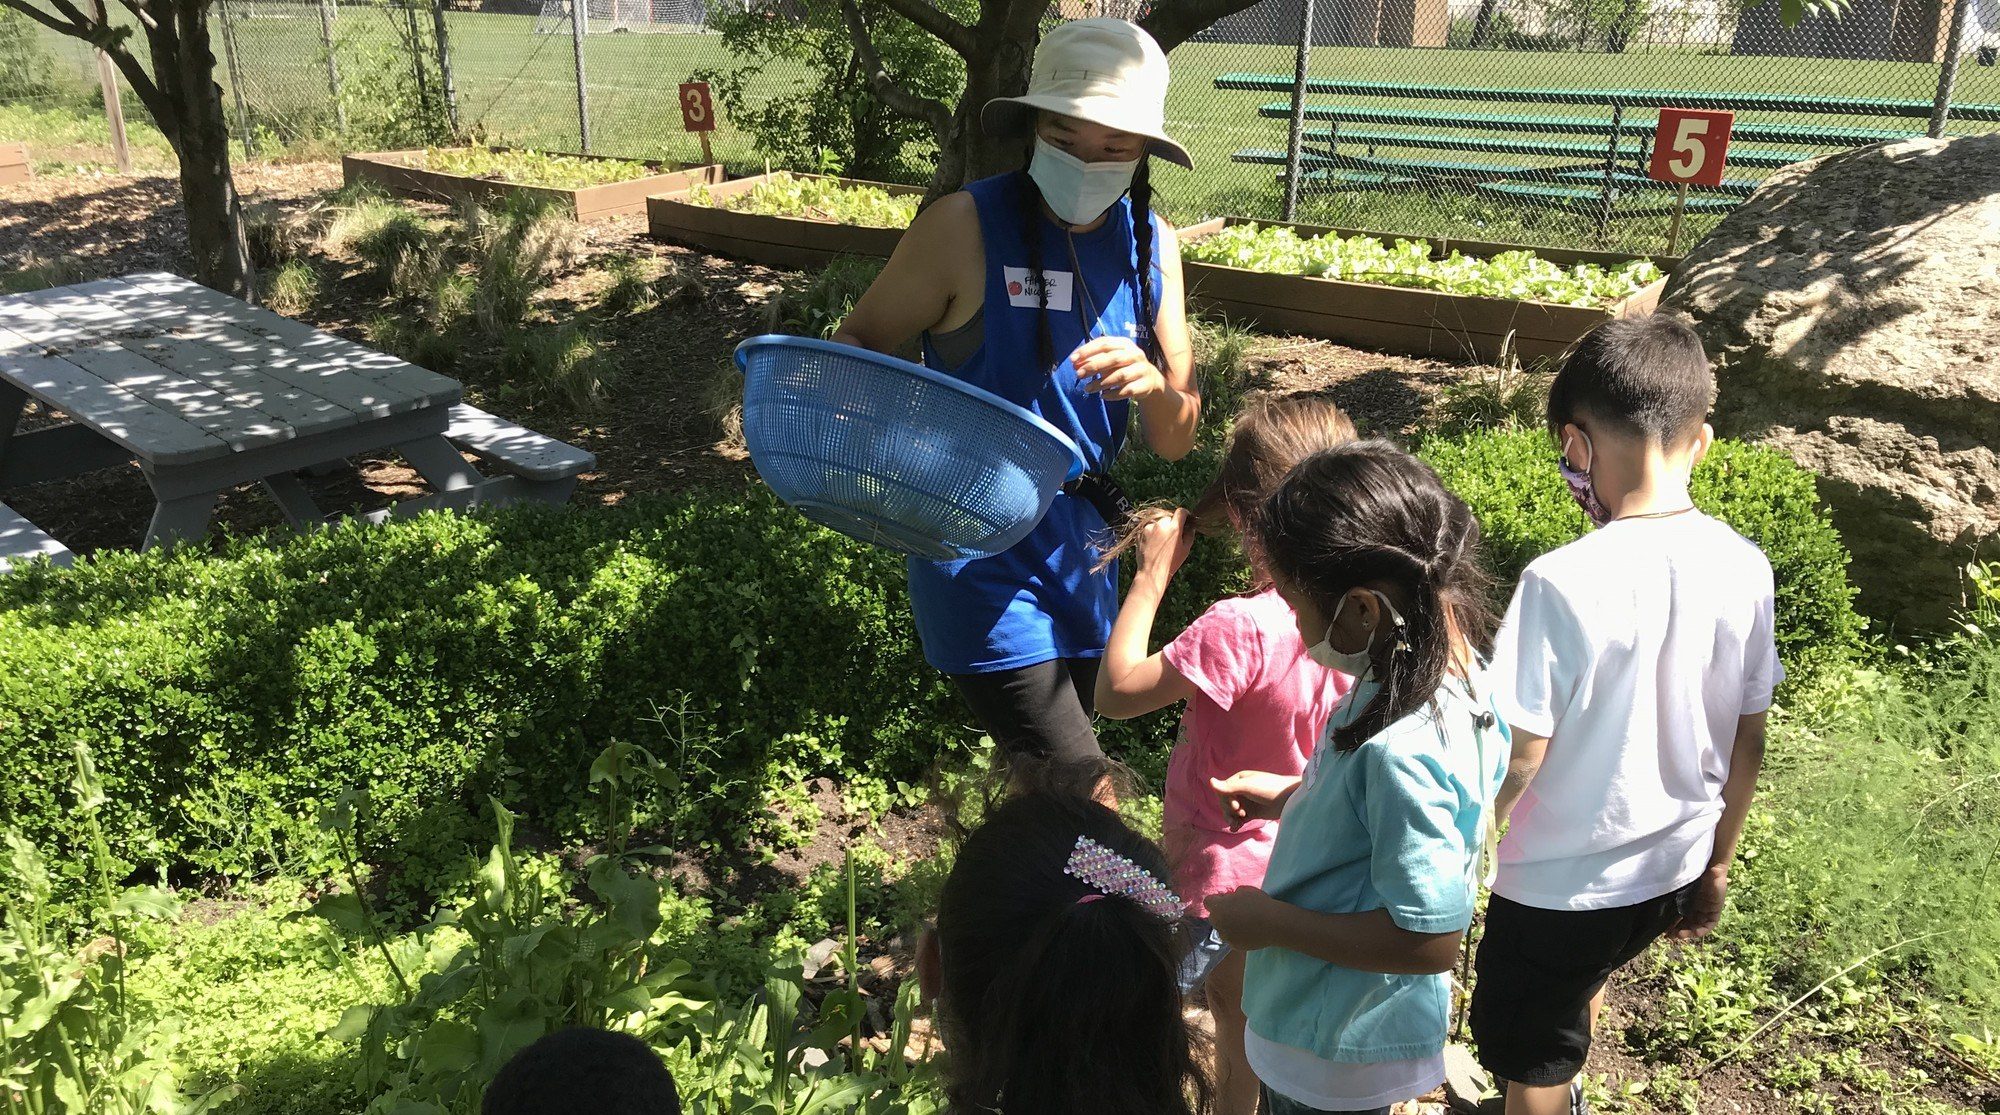 Image of Nicole Yeo farming outdoors while teaching a group of children. July 2021.